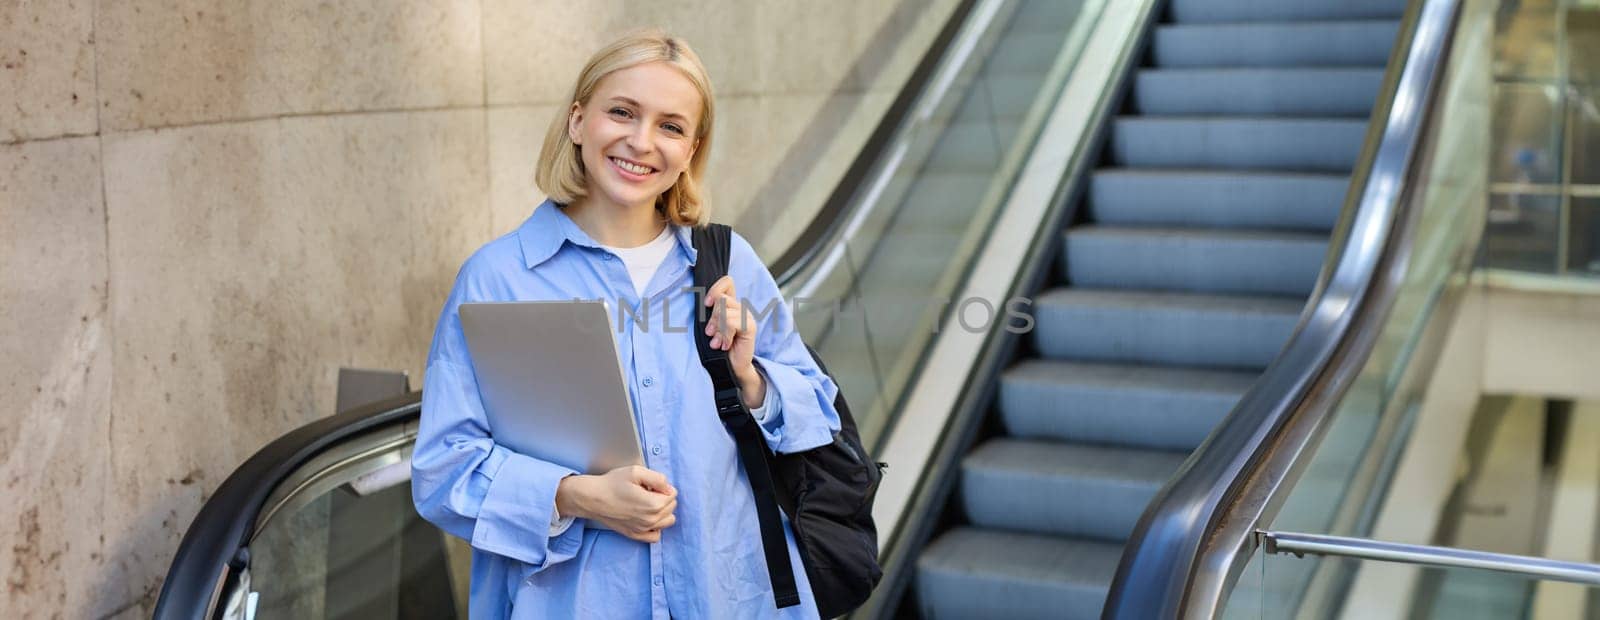 Image of young modern woman, student on escalator, holding laptop and backpack, walking in city.